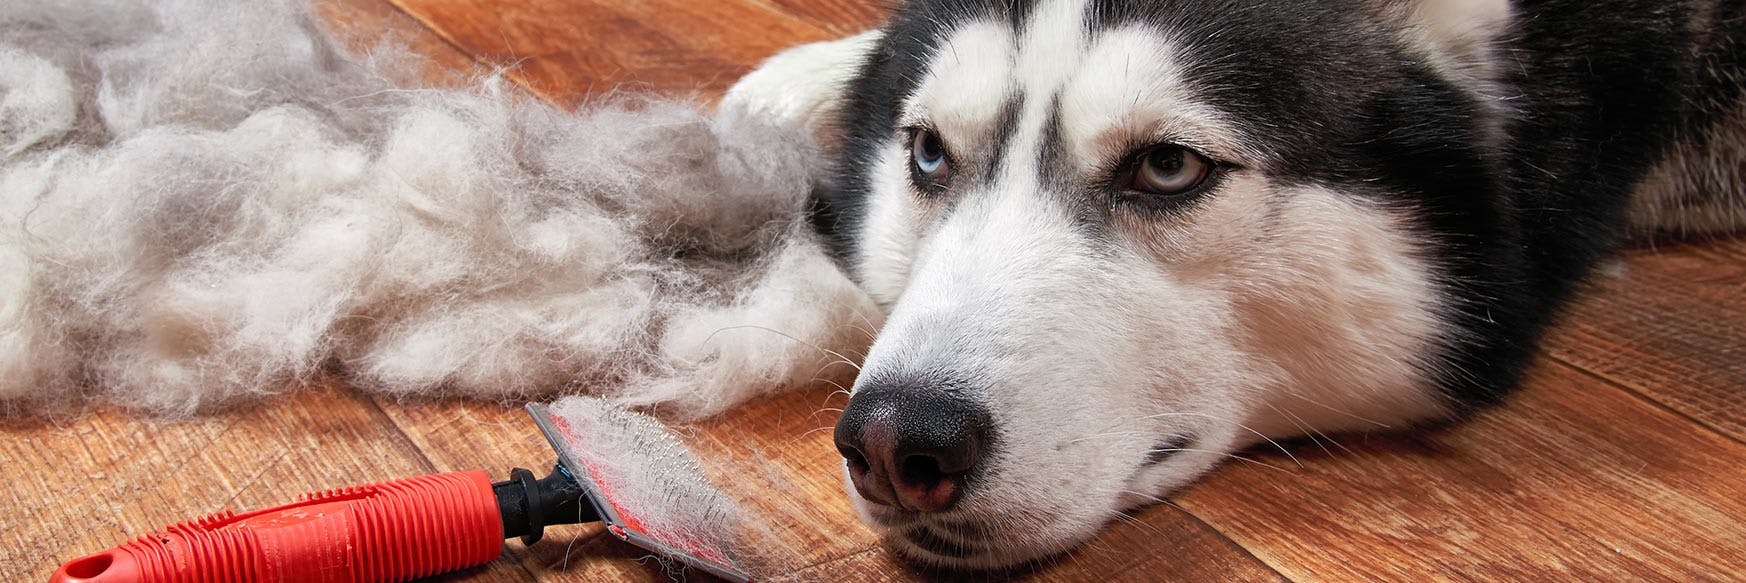 wellness-how-to-prevent-your-dog-from-molting-hero-image